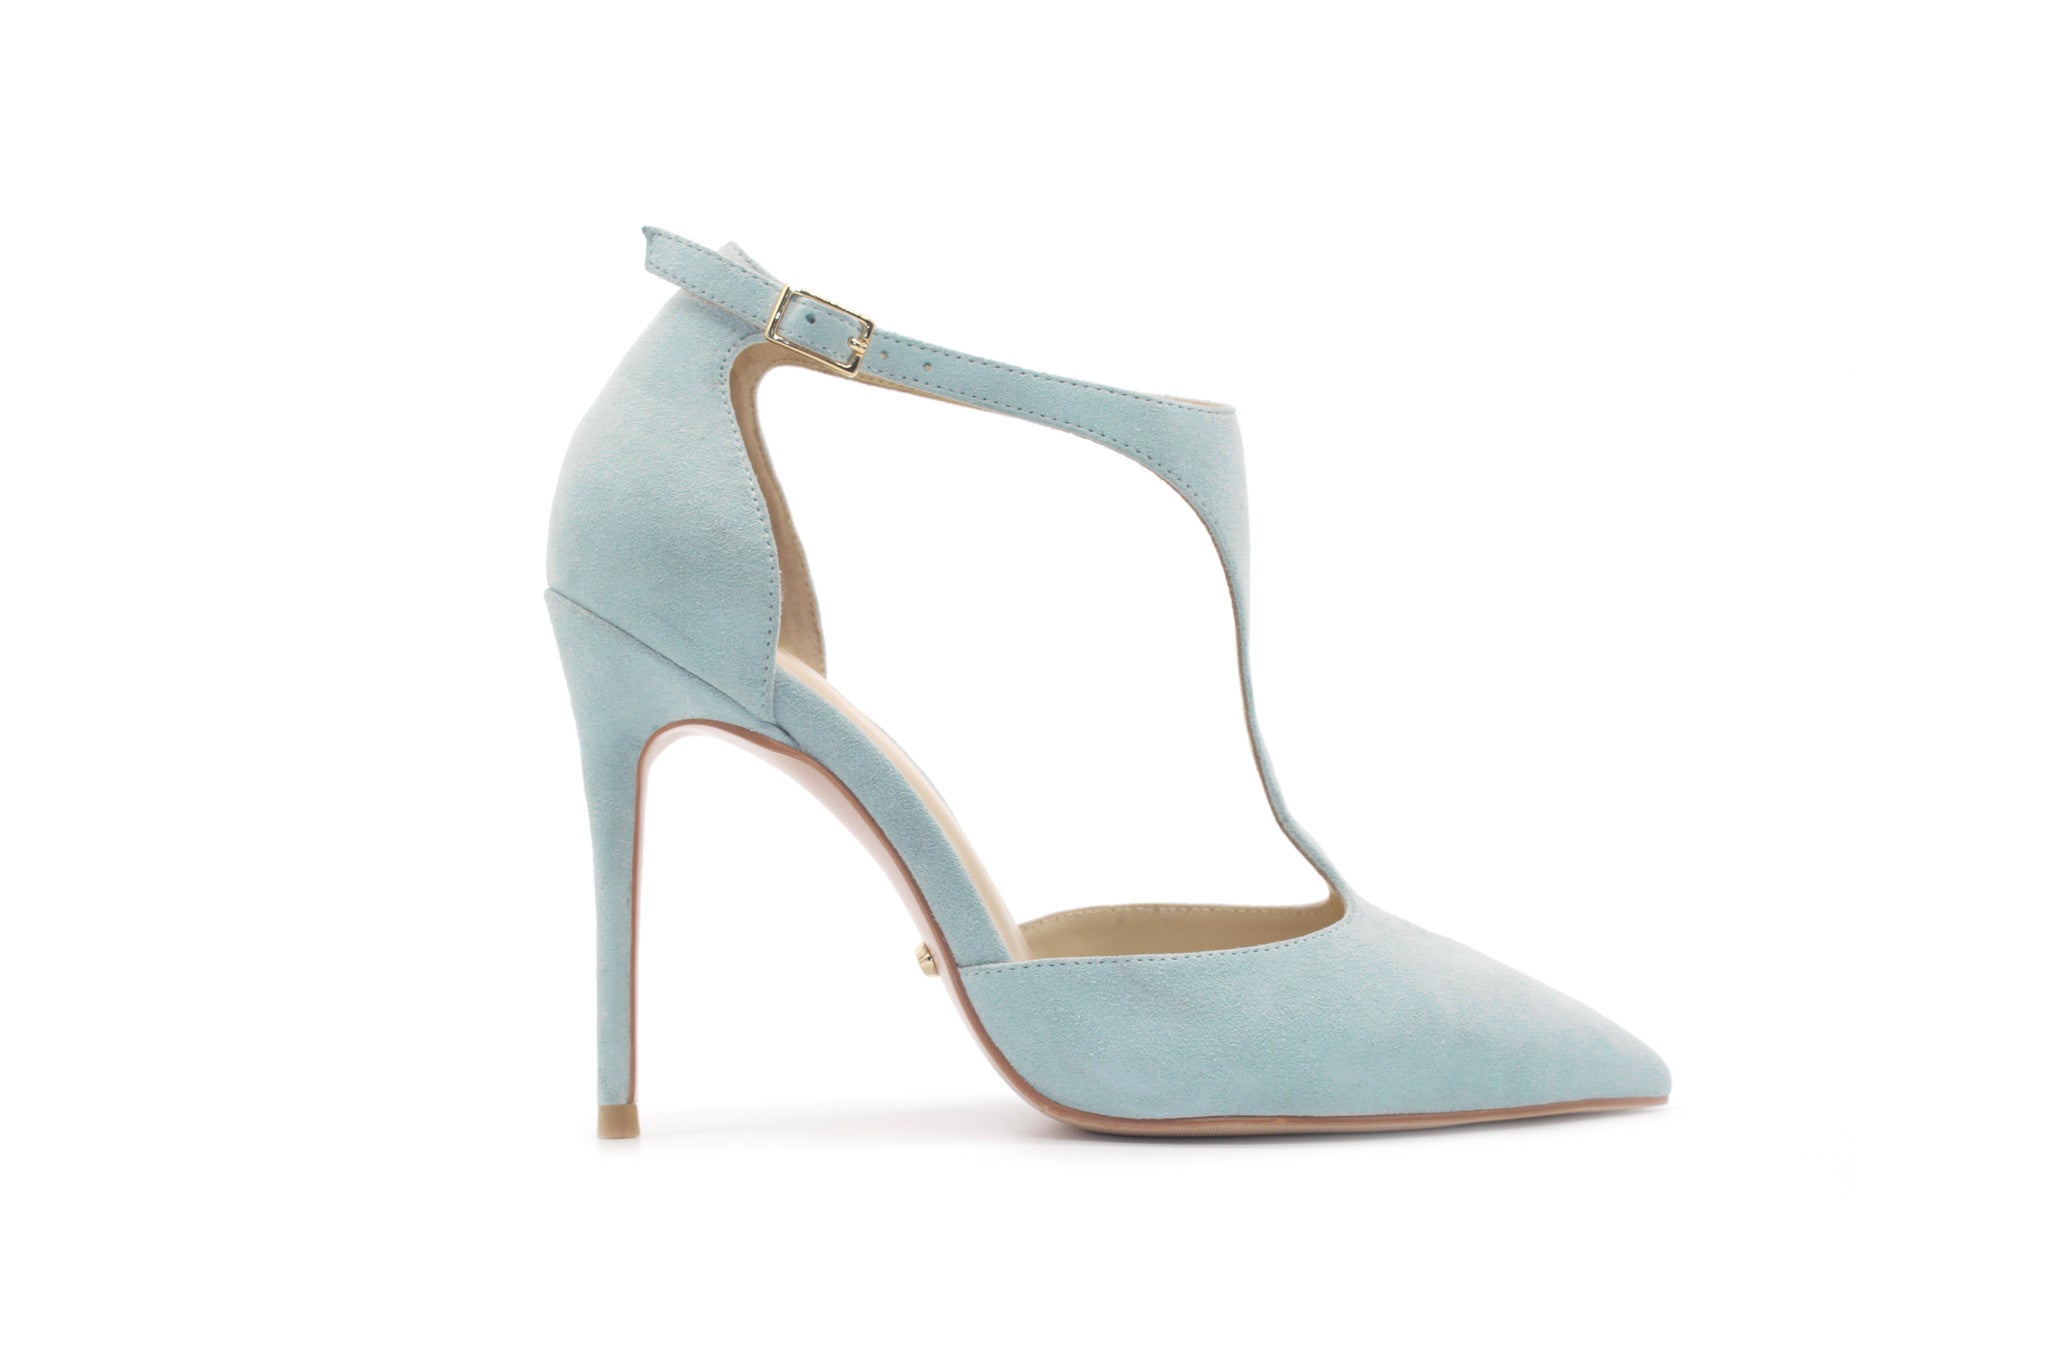 blue suede heeled shoes